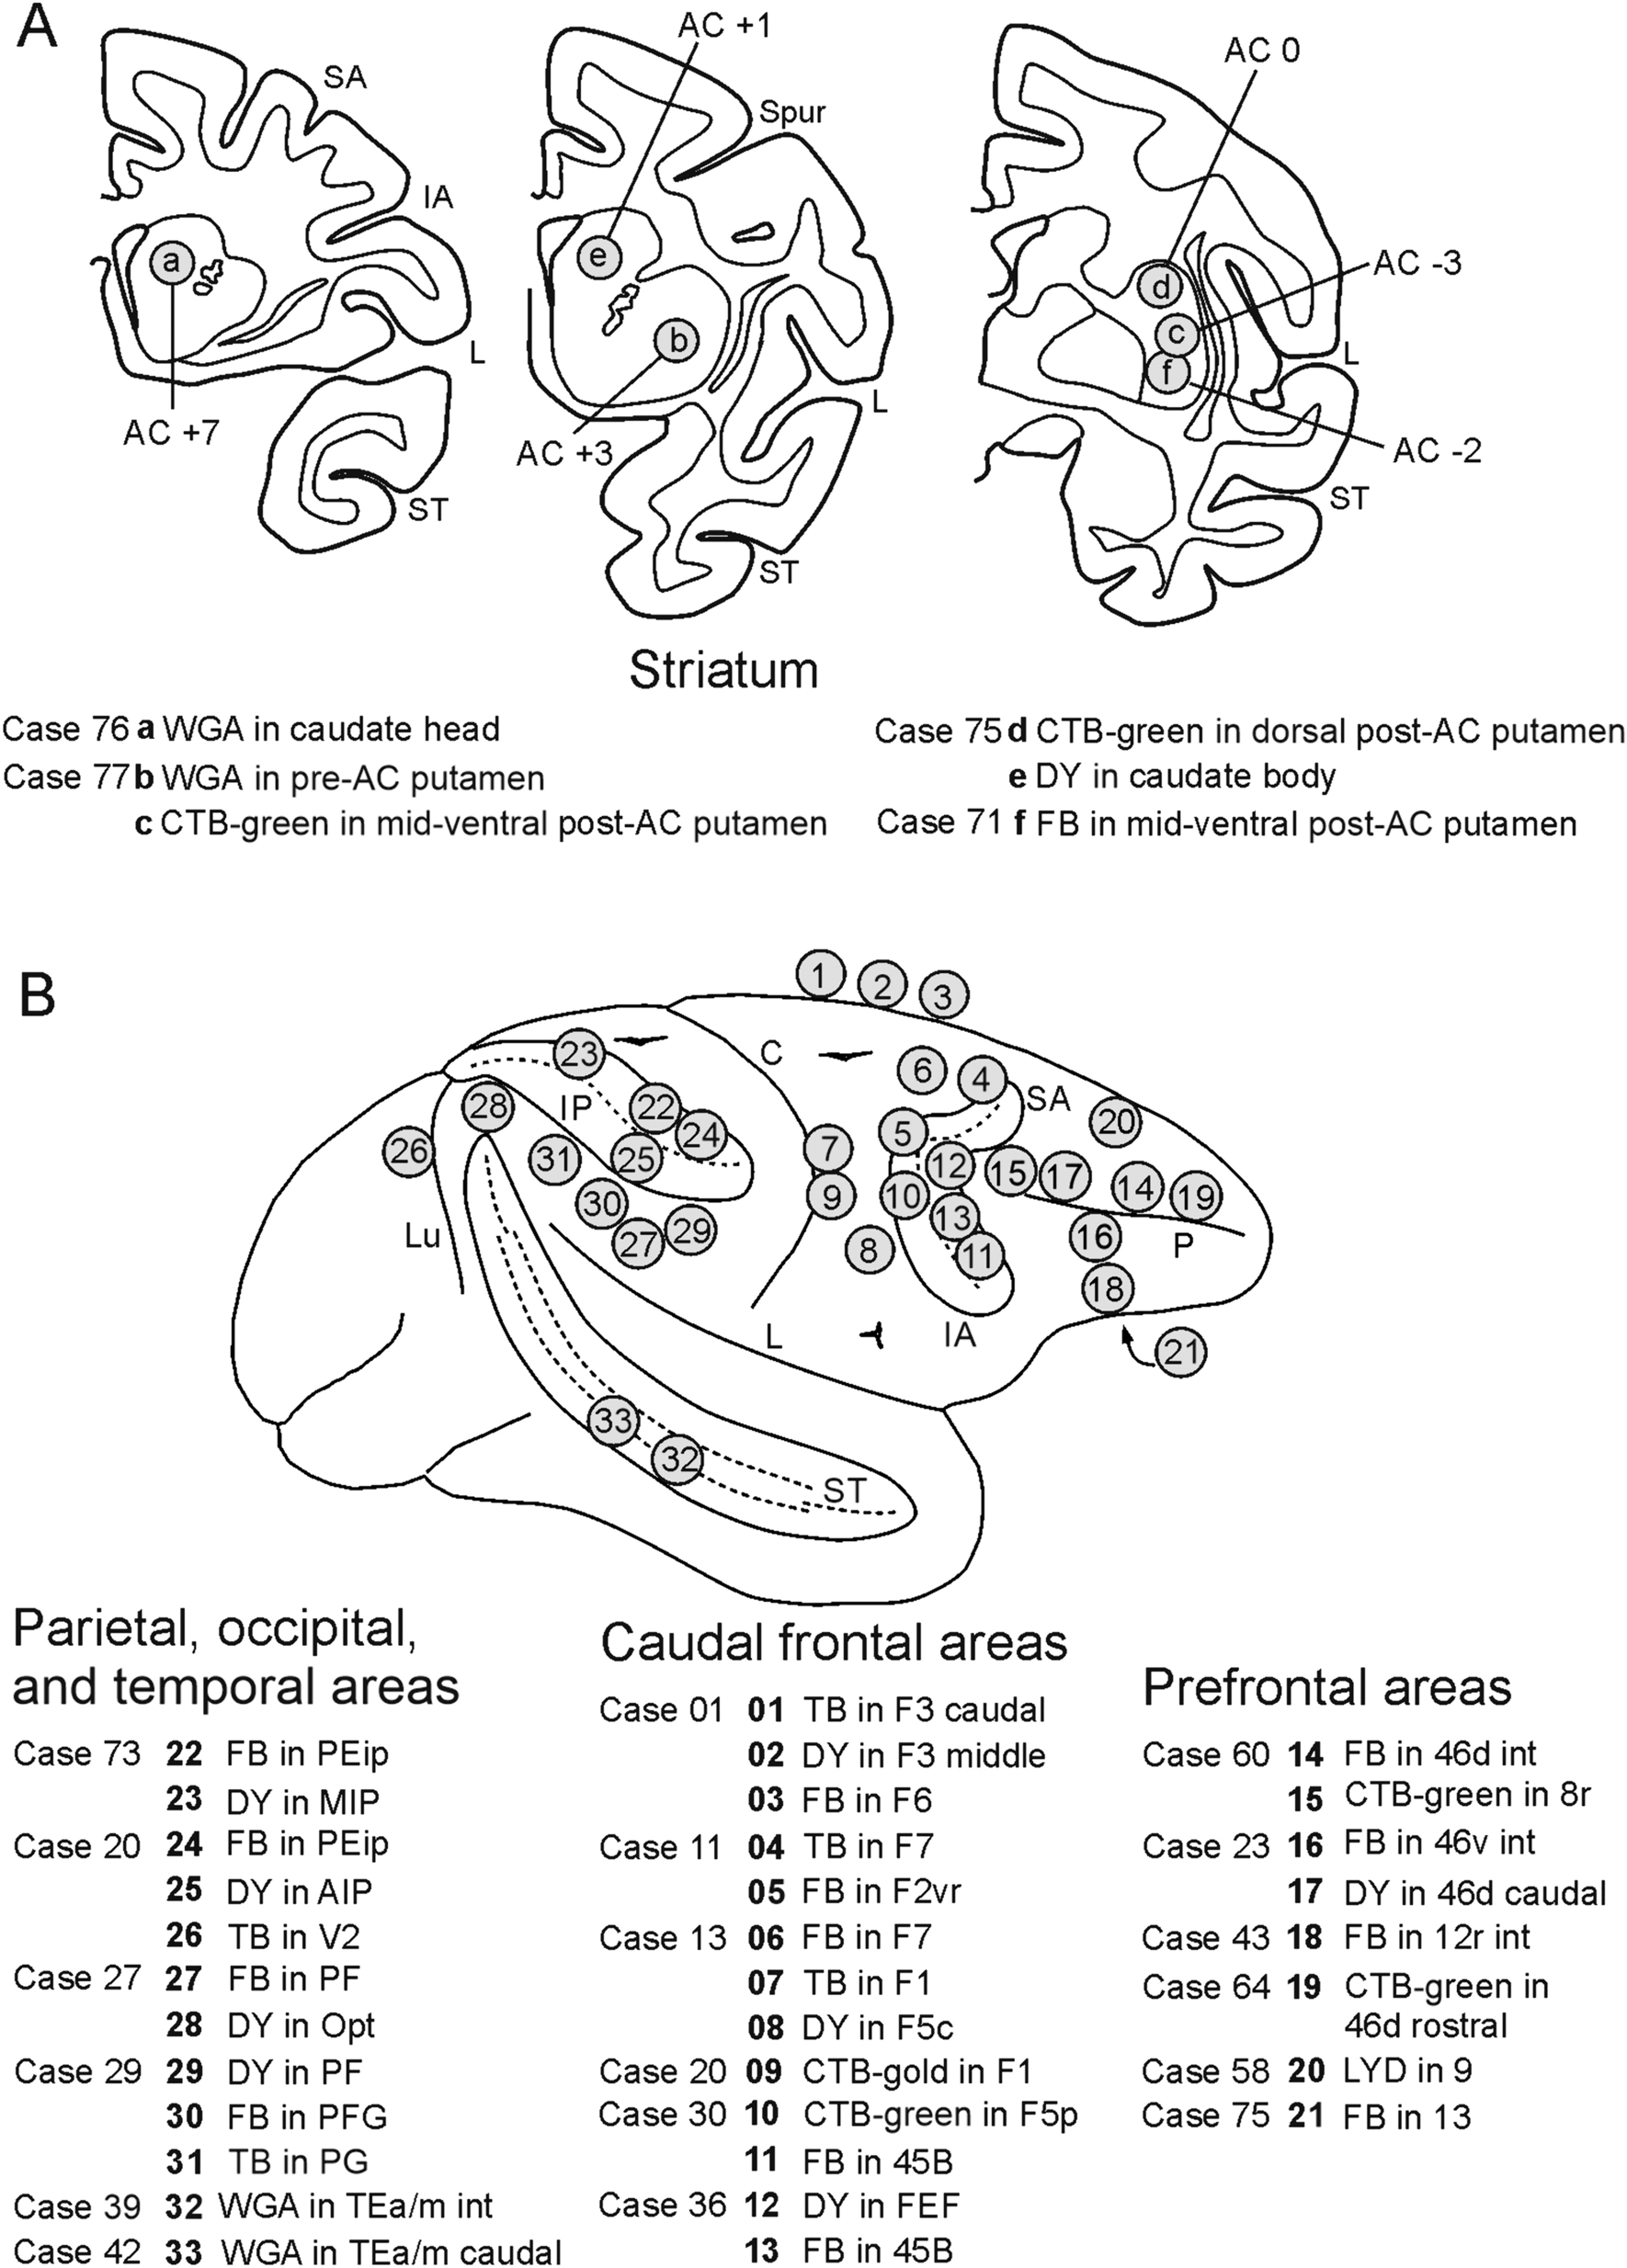 Involvement of the claustrum in the cortico-basal ganglia circuitry: connectional study in the non-human primate